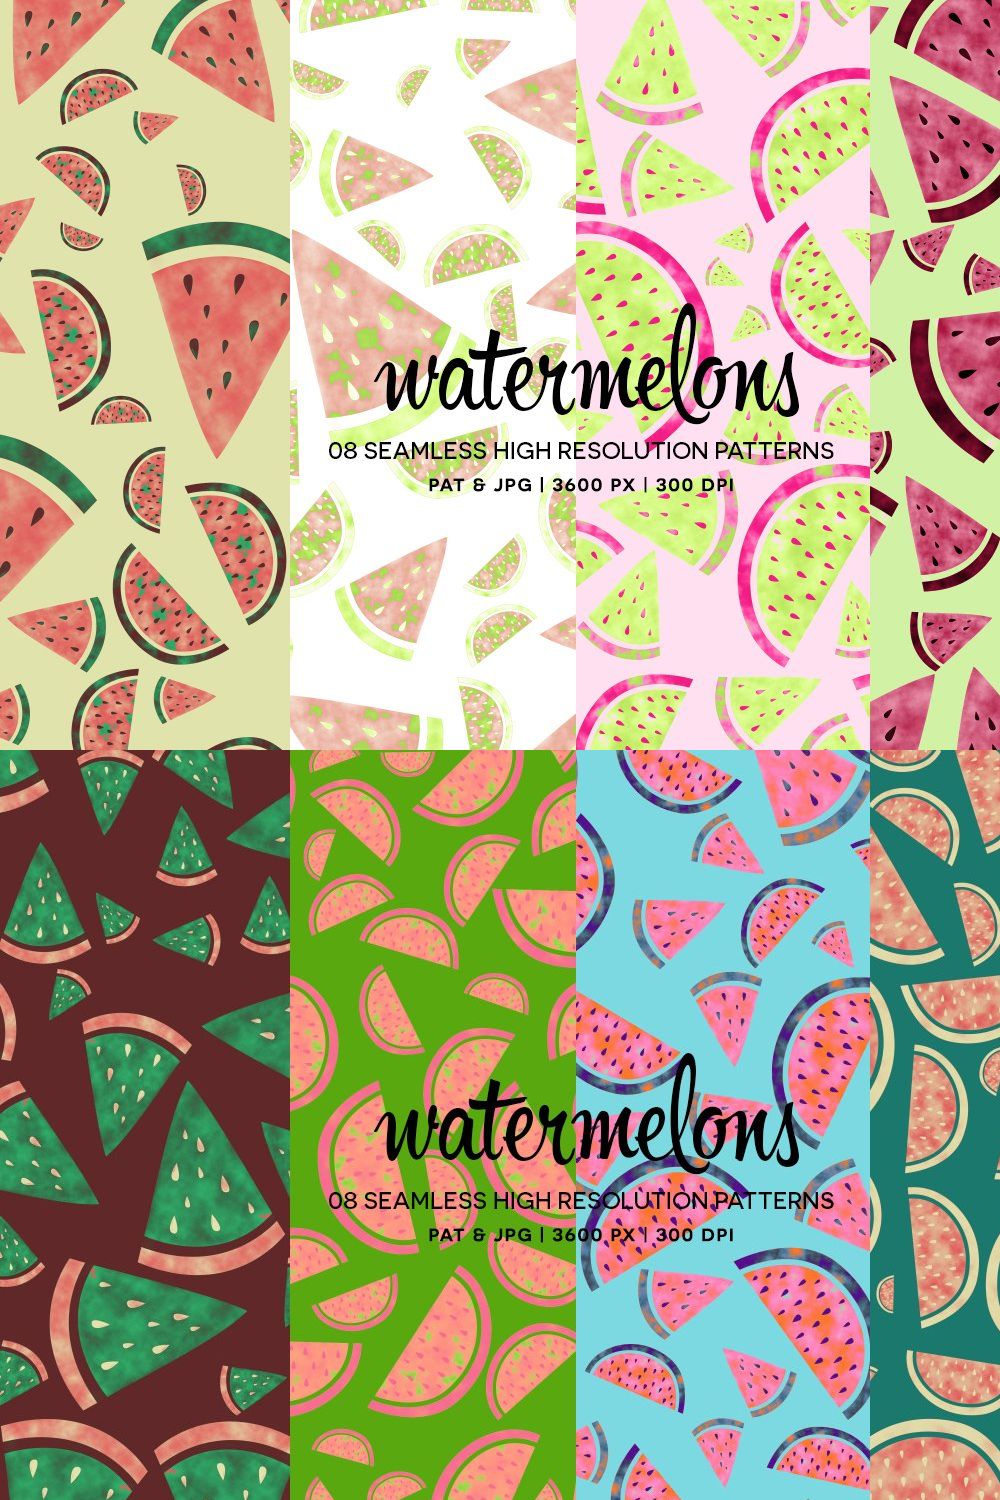 Watermelons pinterest preview image.